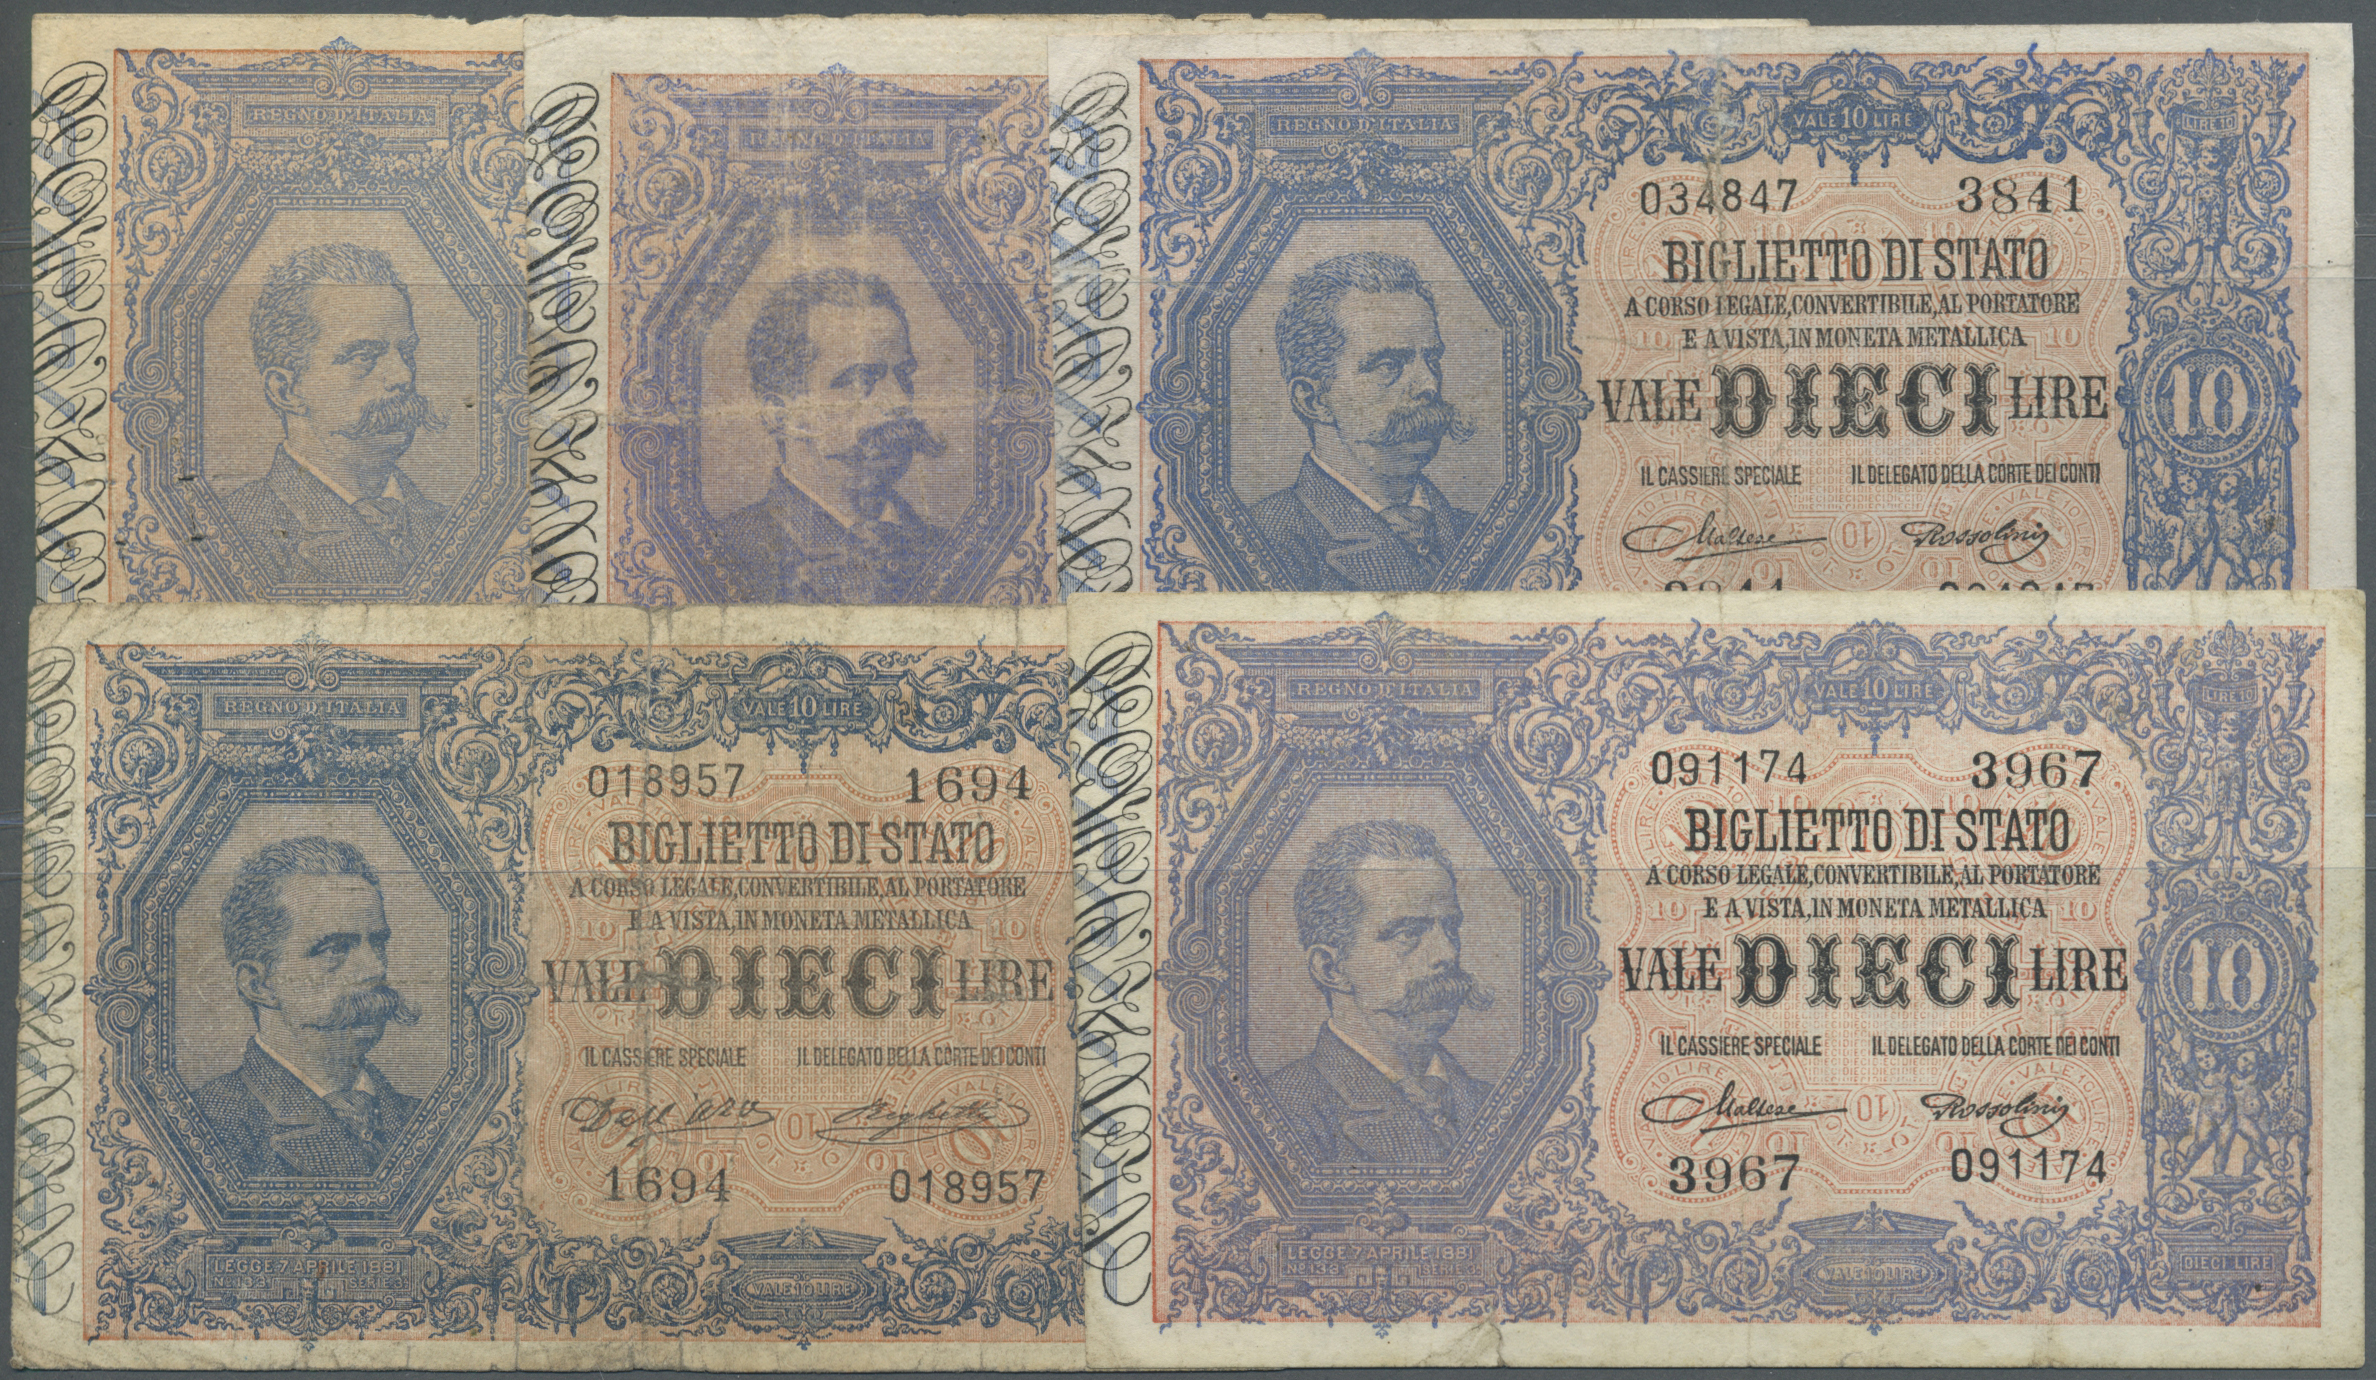 Lot 00452 - Italy / Italien | Banknoten  -  Auktionshaus Christoph Gärtner GmbH & Co. KG Sale #48 The Banknotes